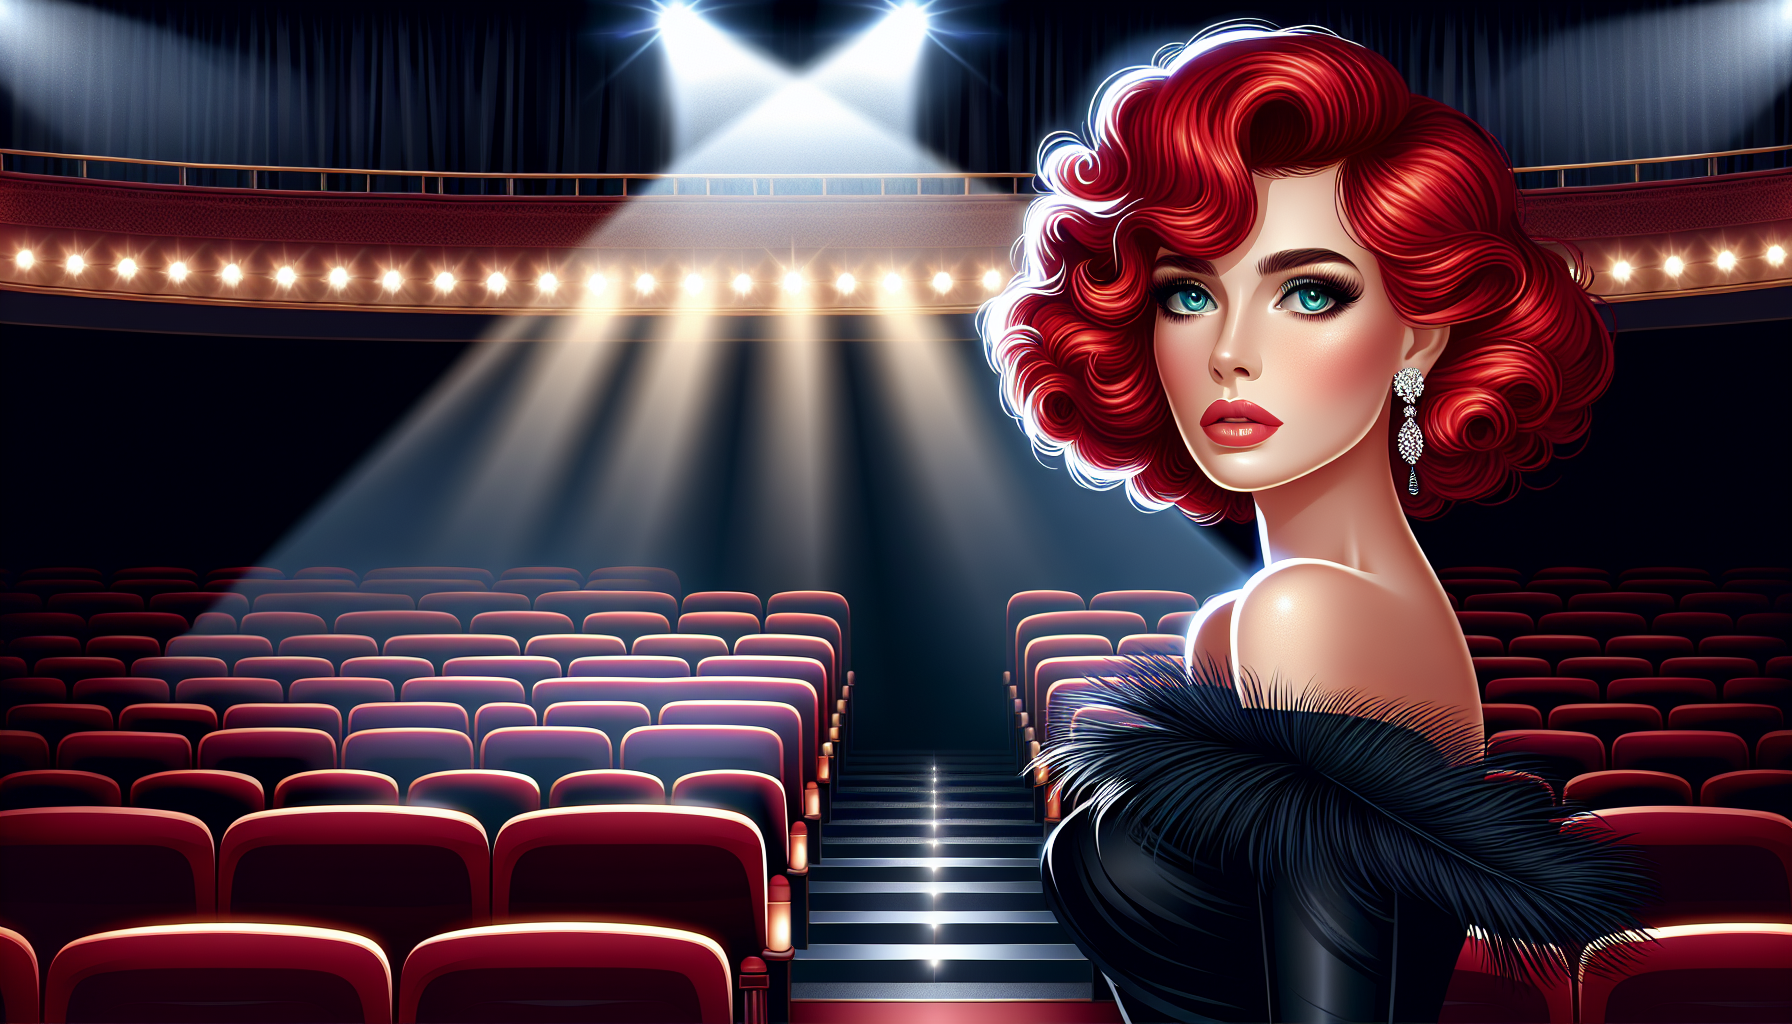 Create a digital artwork of a stylish Nicole Kidman in an elegant theater, standing under a spotlight with rows of plush red cinema seats surrounding her, referencing her iconic AMC advertisement look